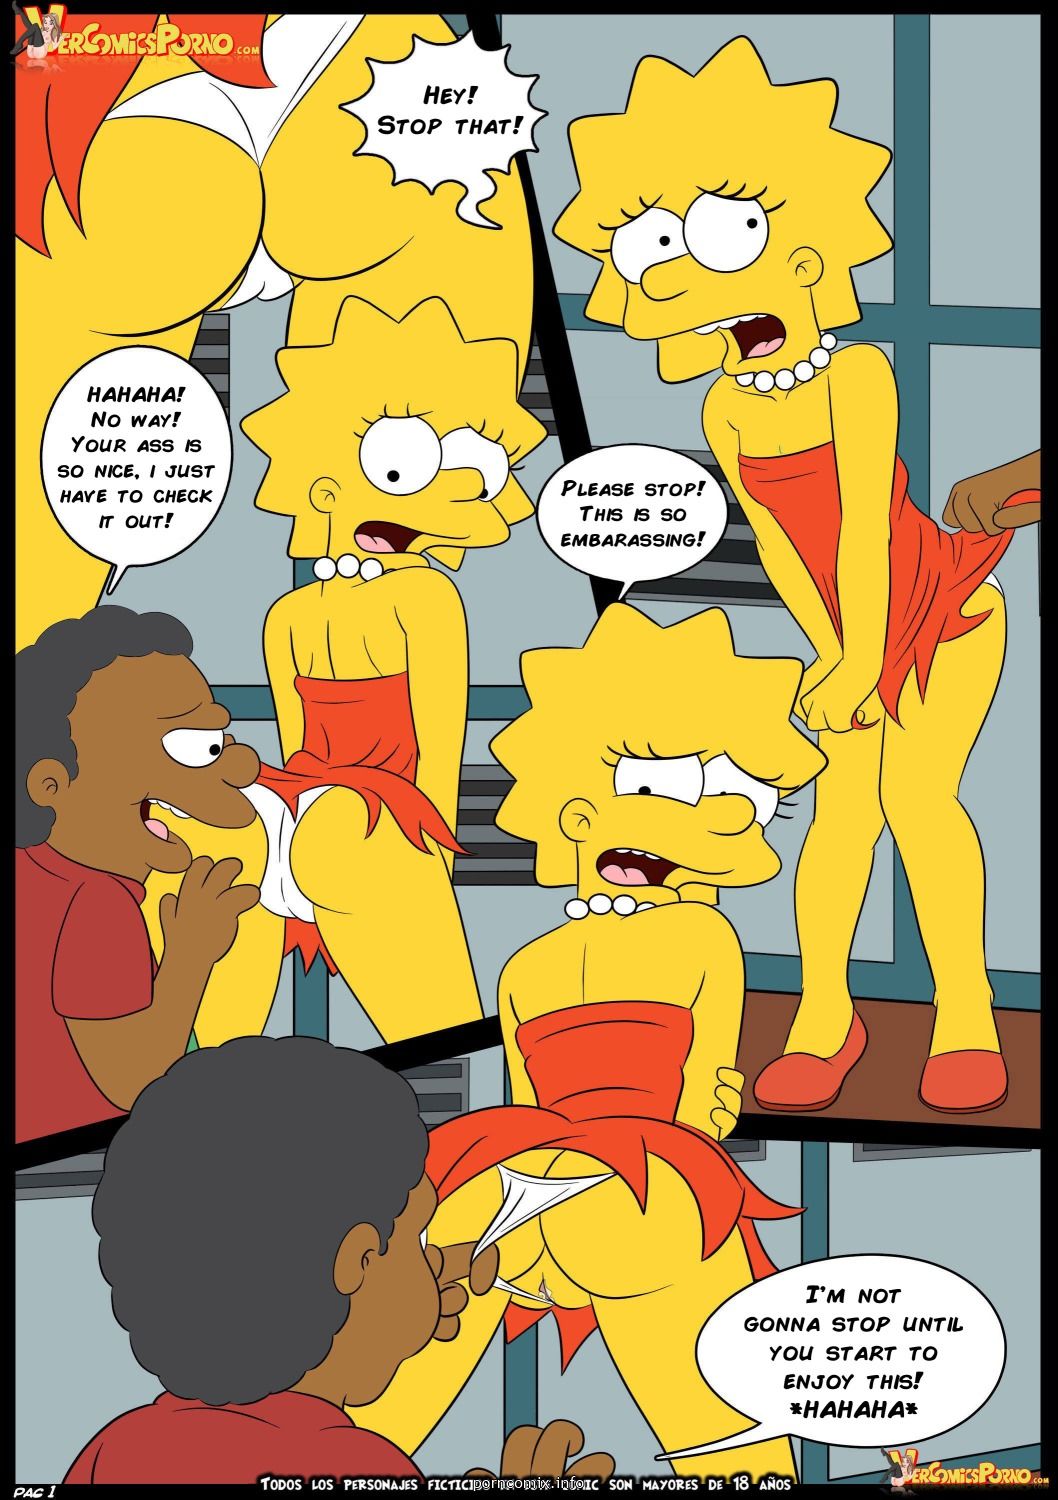 [CROC] The Simpsons Love for Bully (English) page 2